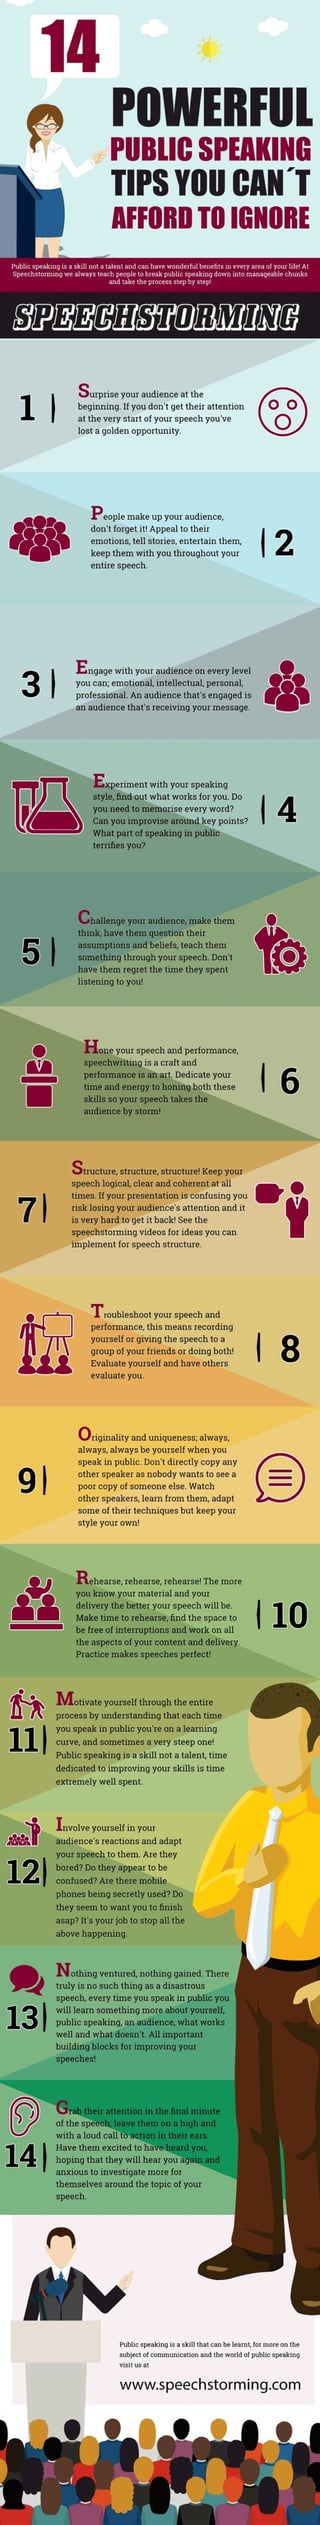 Public speaking tips you can't afford to ignore